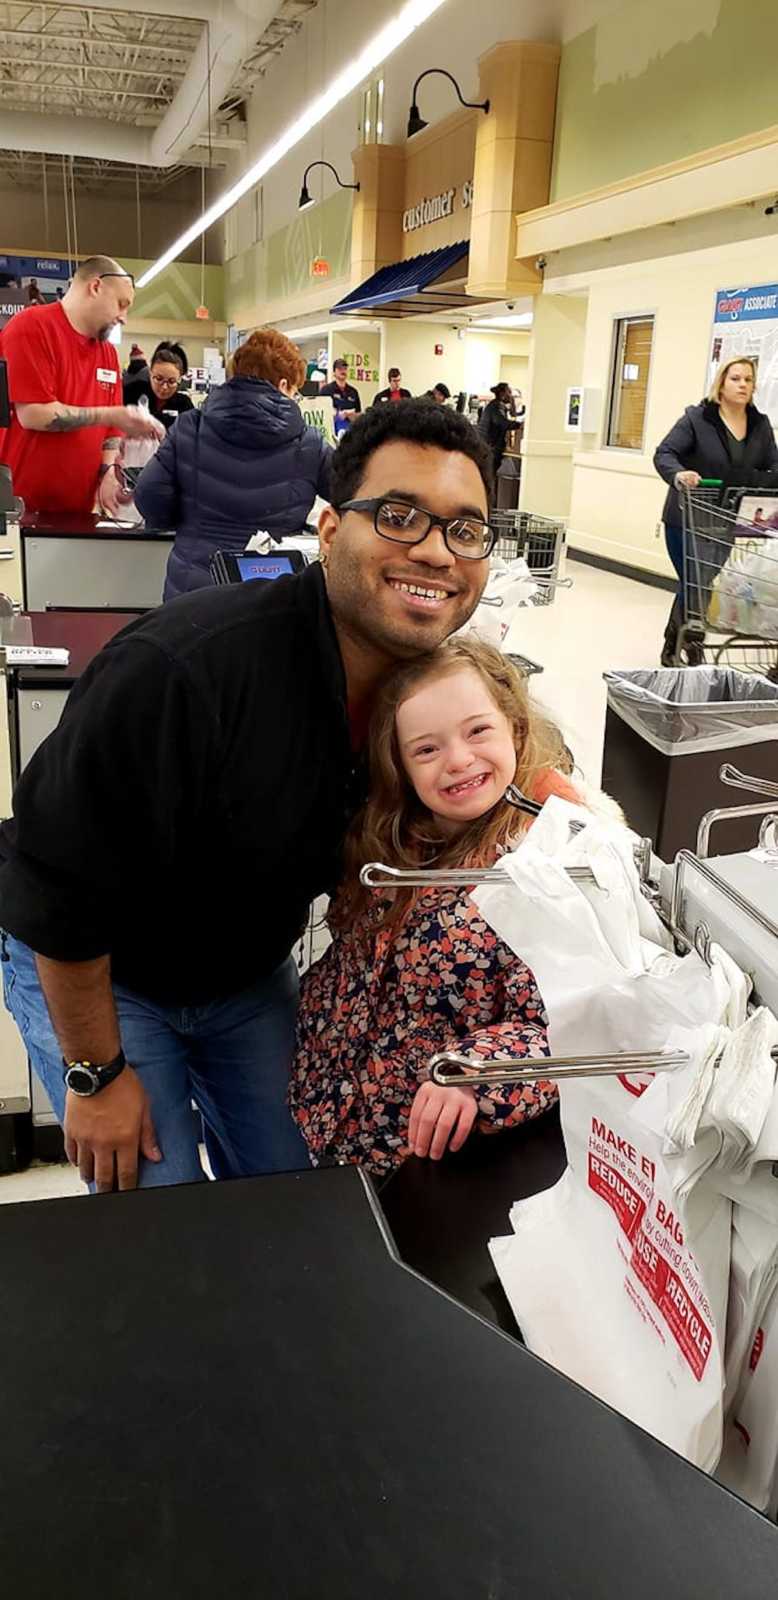 Grocery store worker smiles beside little girl with down syndrome